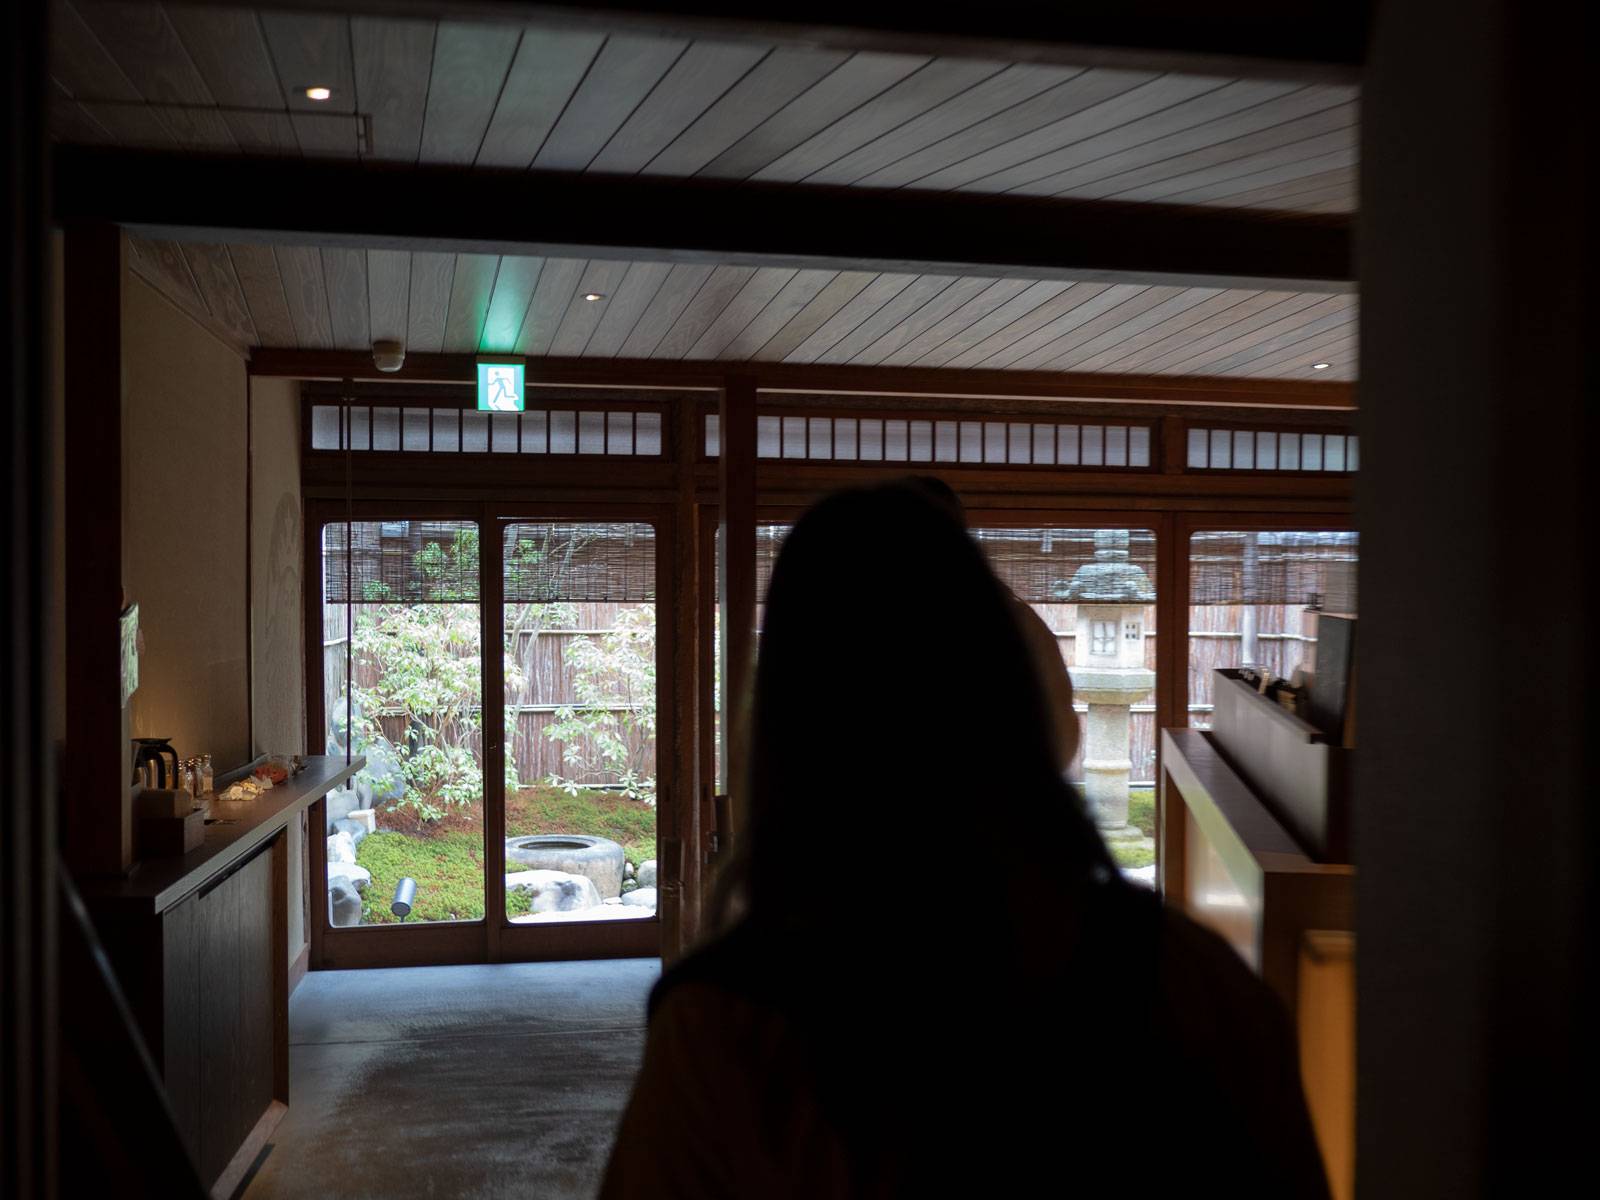 Finding a seat in the tea house